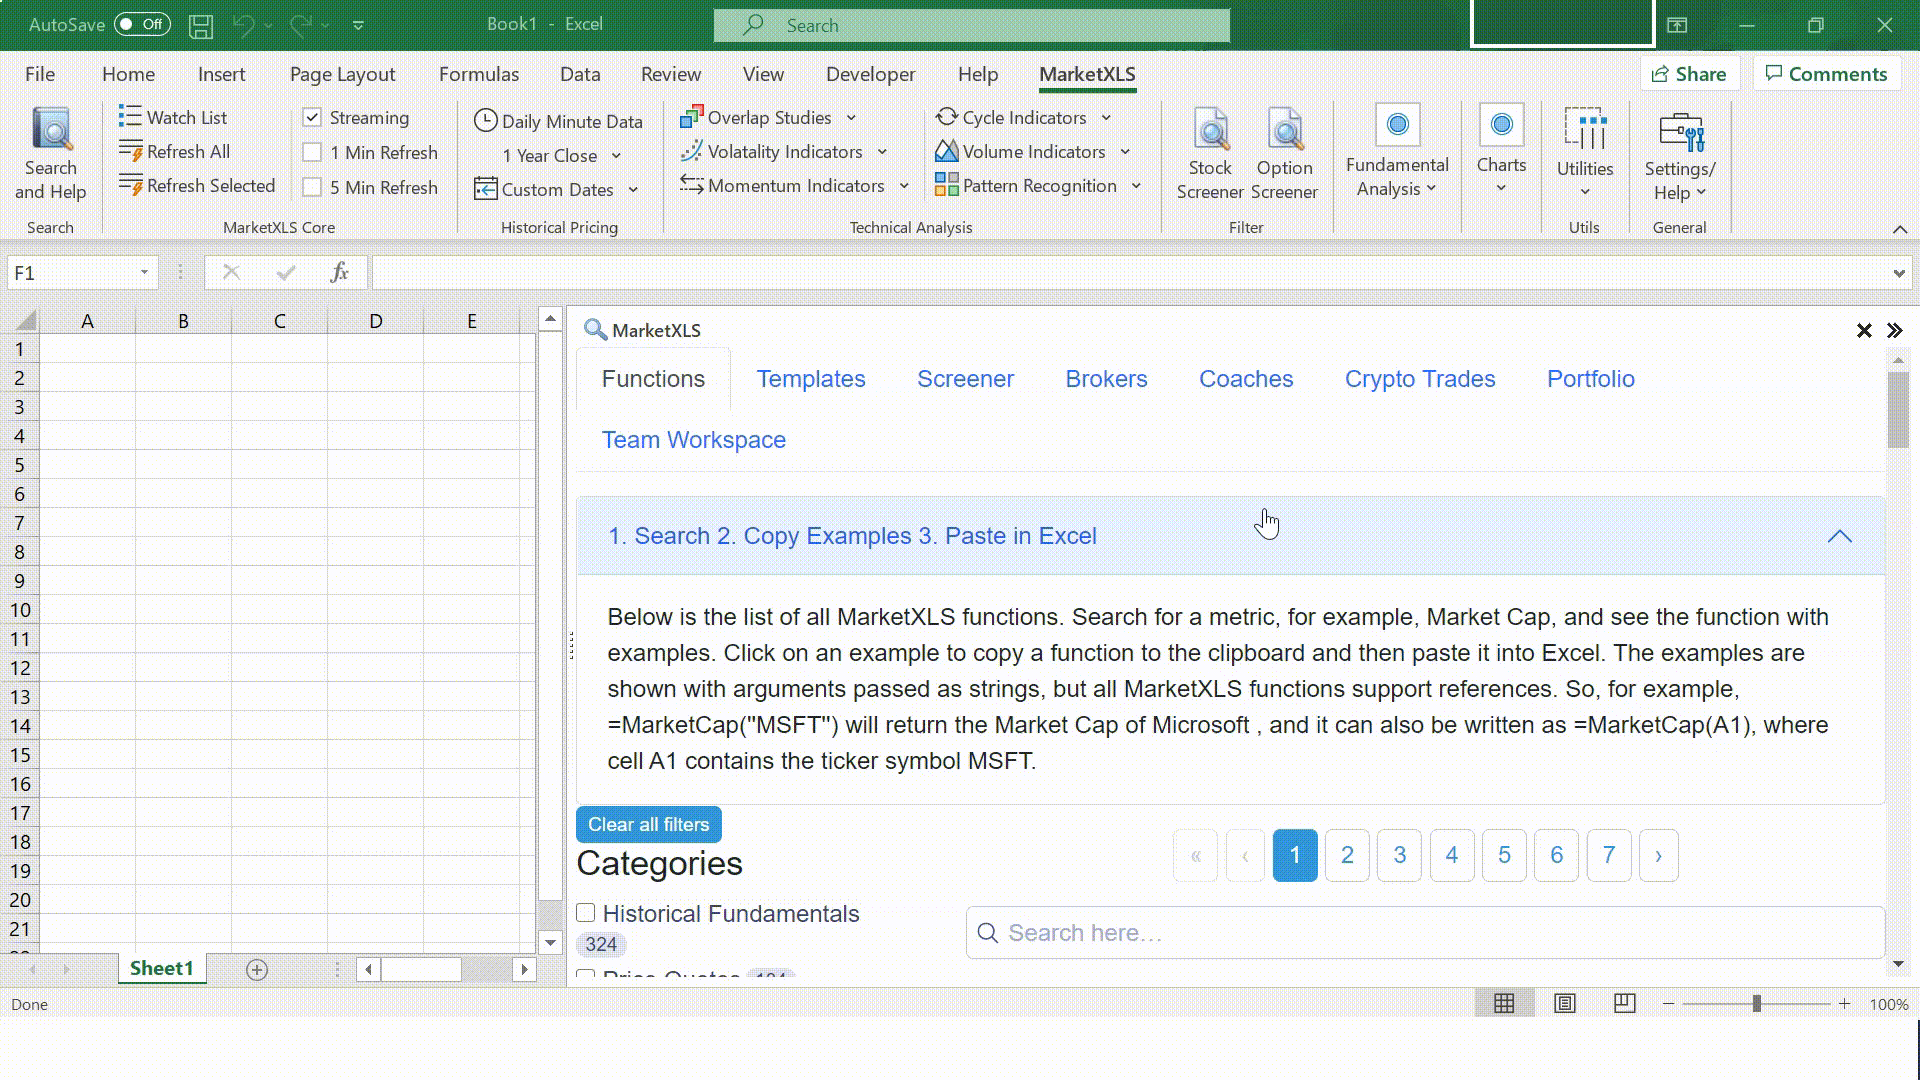 MarketXLS functions in excel - copy feature